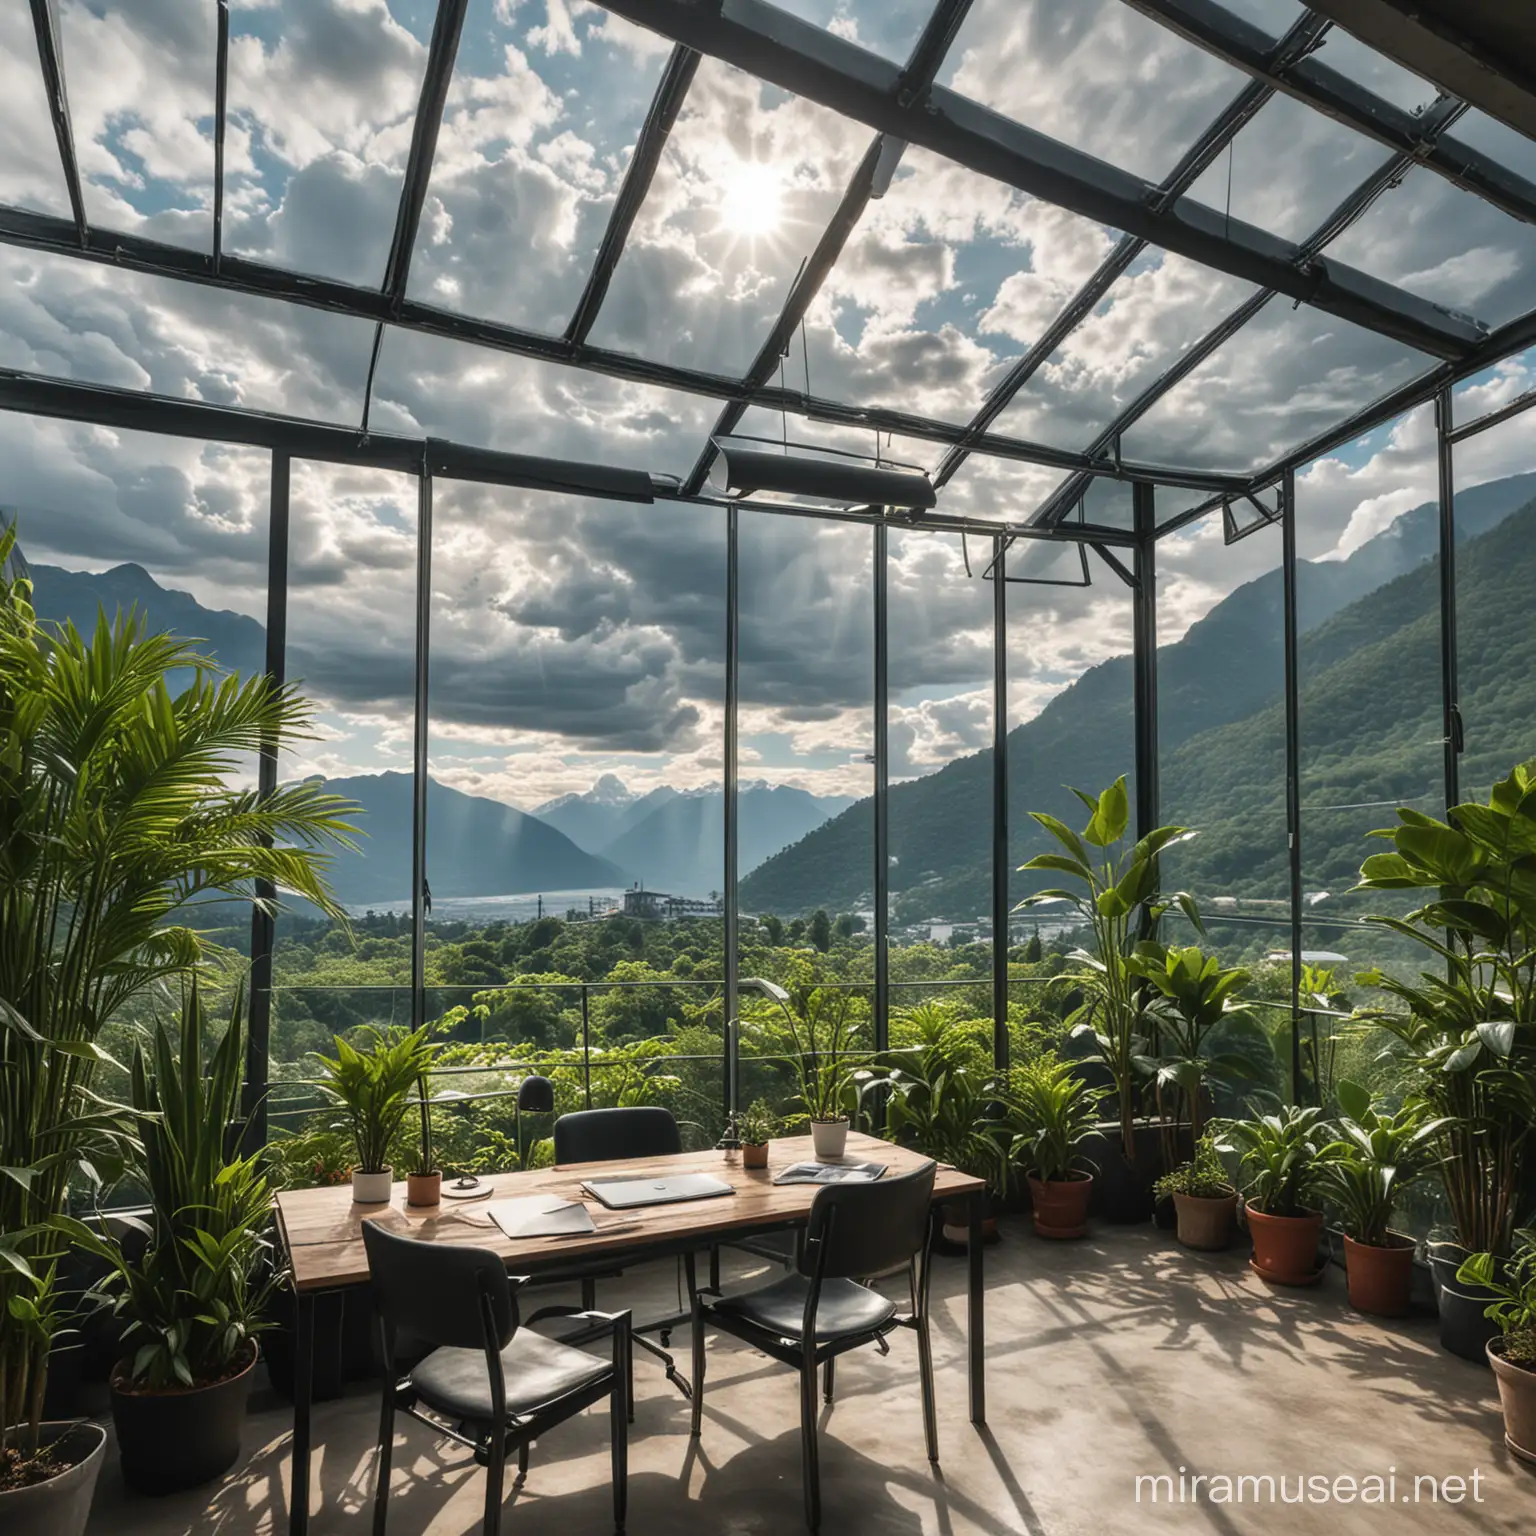 Greenhouse Office with Mountain View under Dramatic Sky